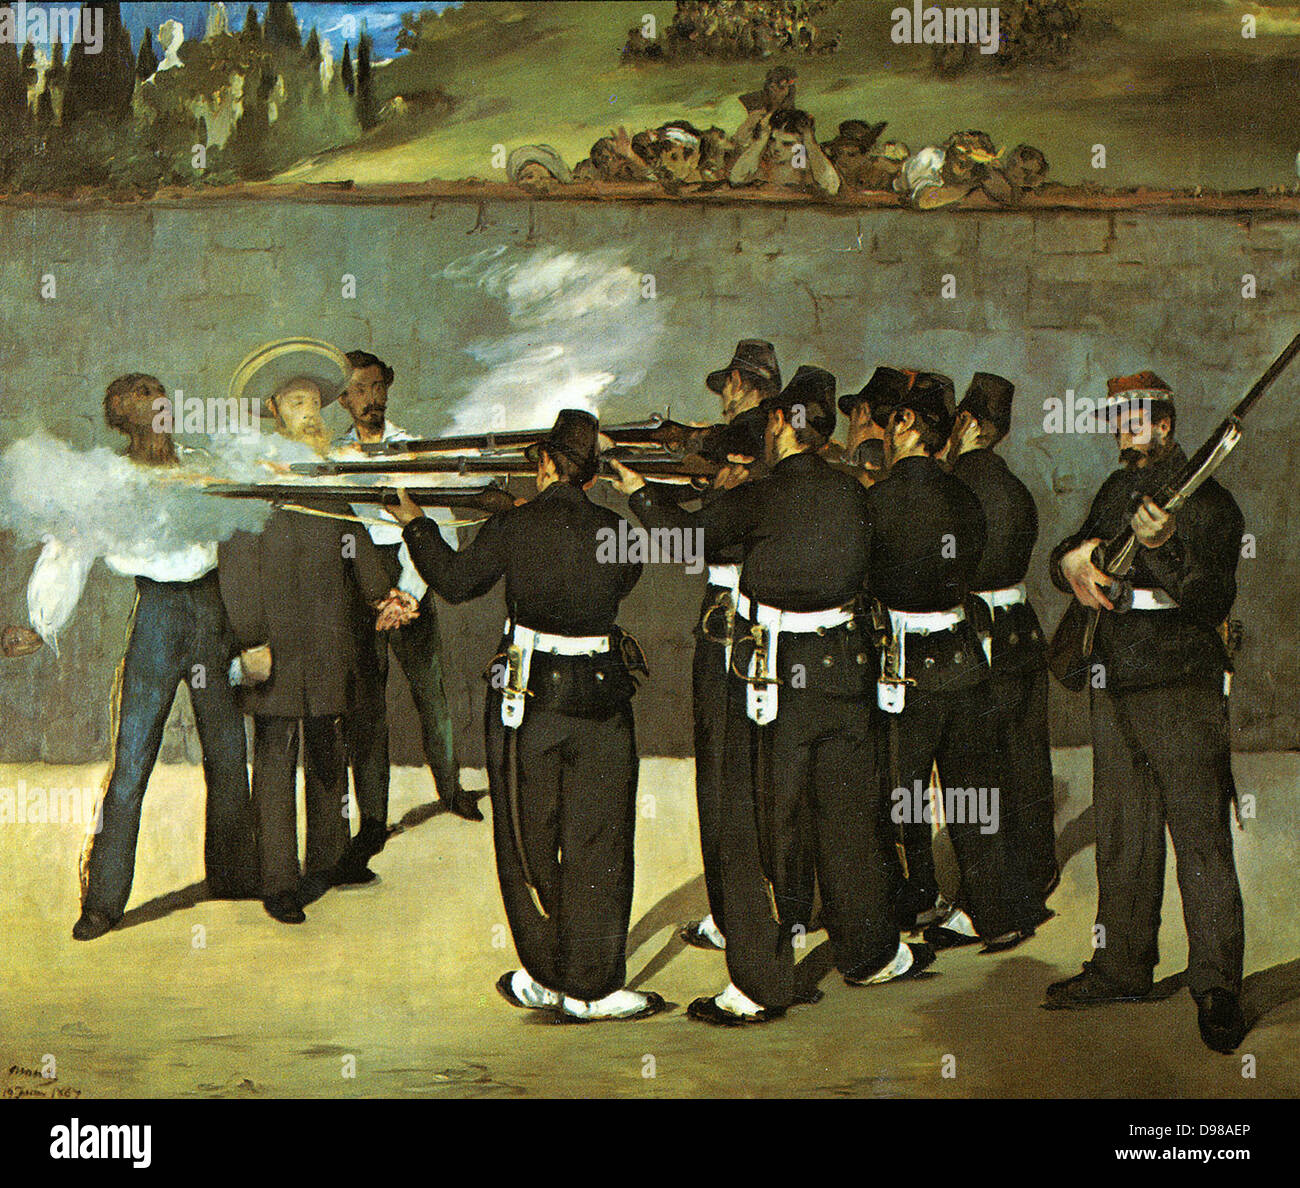 Archduke Ferdinand Maximilian von Habsburg (1832-1867) Brother of Emperor Franz Josef of Austria-Hungary. Emperor of Mexico 1862-1867    Execution of Maximilian   painting by the French artist Edouard Manet Stock Photo